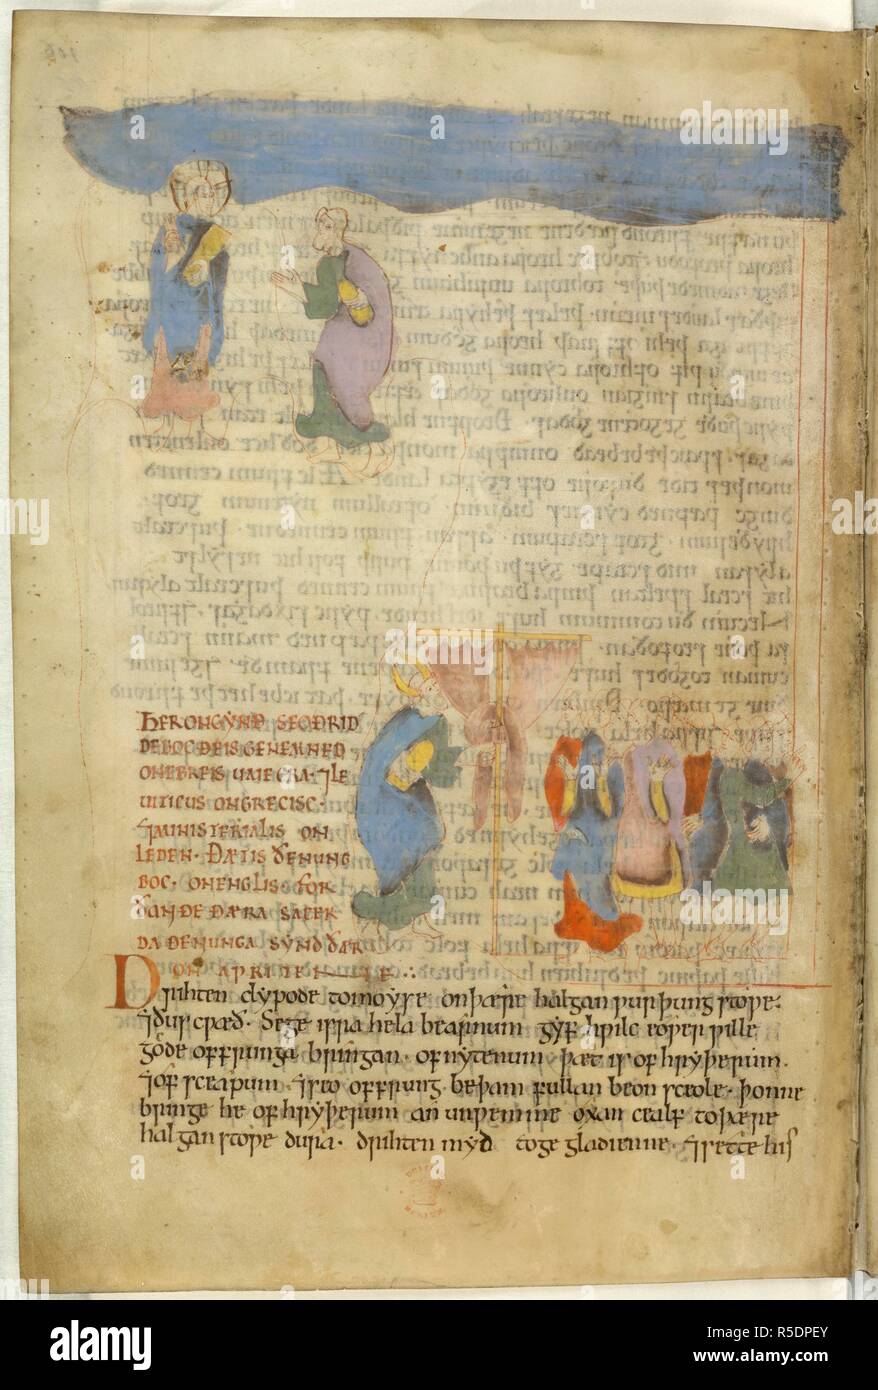 Moses receives the Tablets. Old English Illustrated Hexateuch. England [Canterbury]; second quarter of 11th centu. (Whole folio) Exodus 34, 4-33. God speaks to Moses on Mount Sinai. Below; Moses returns to the Israelites with the Tablets of the Law; he is horned, and veils his face before the Israelites  Image taken from Old English Illustrated Hexateuch.  Originally published/produced in England [Canterbury]; second quarter of 11th century. . Source: Cotton Claudius B. IV, f.105v. Language: Anglo-Saxon. Stock Photo